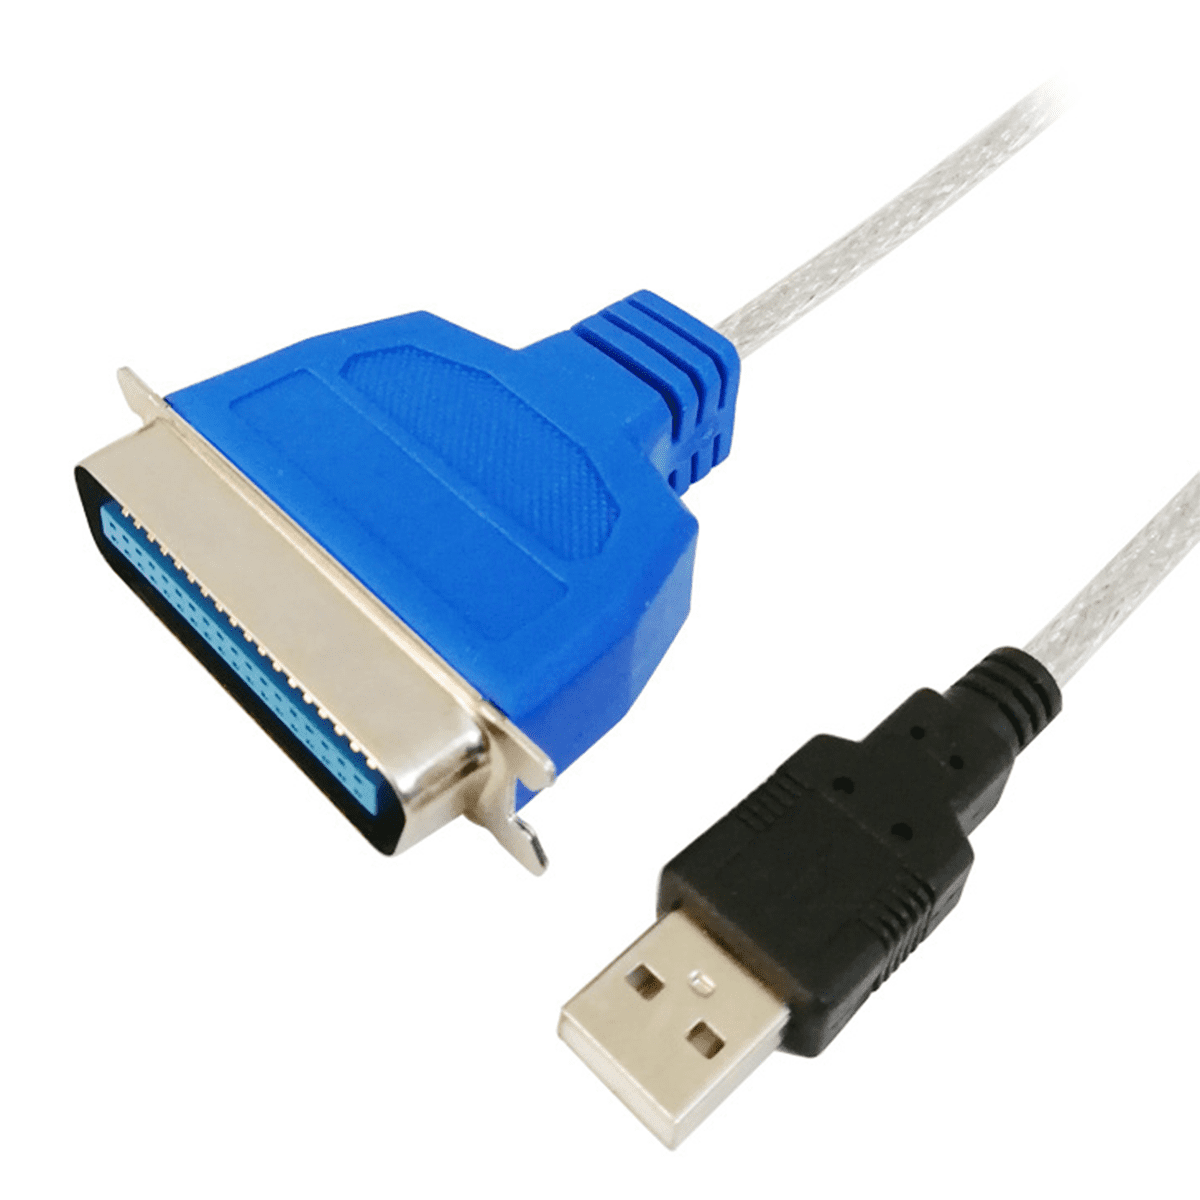 CB-1284 USB to DB25 Parallel Printer Cable Adapter IEEE 1284 Interface Communication 25 Pin Black Bi-Directional Cord Converter 